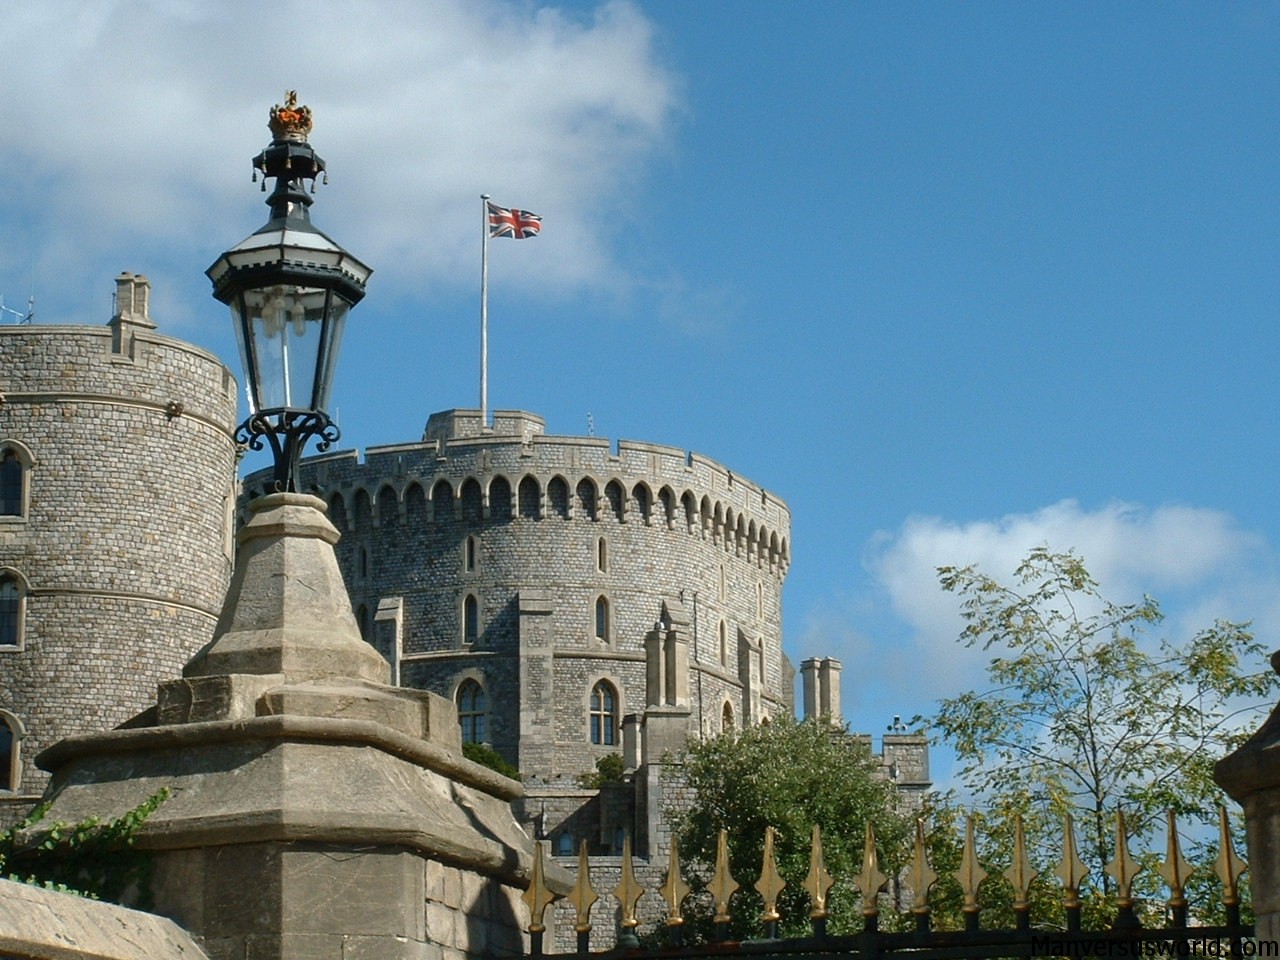 Windsor Castle - home of the Queen of England